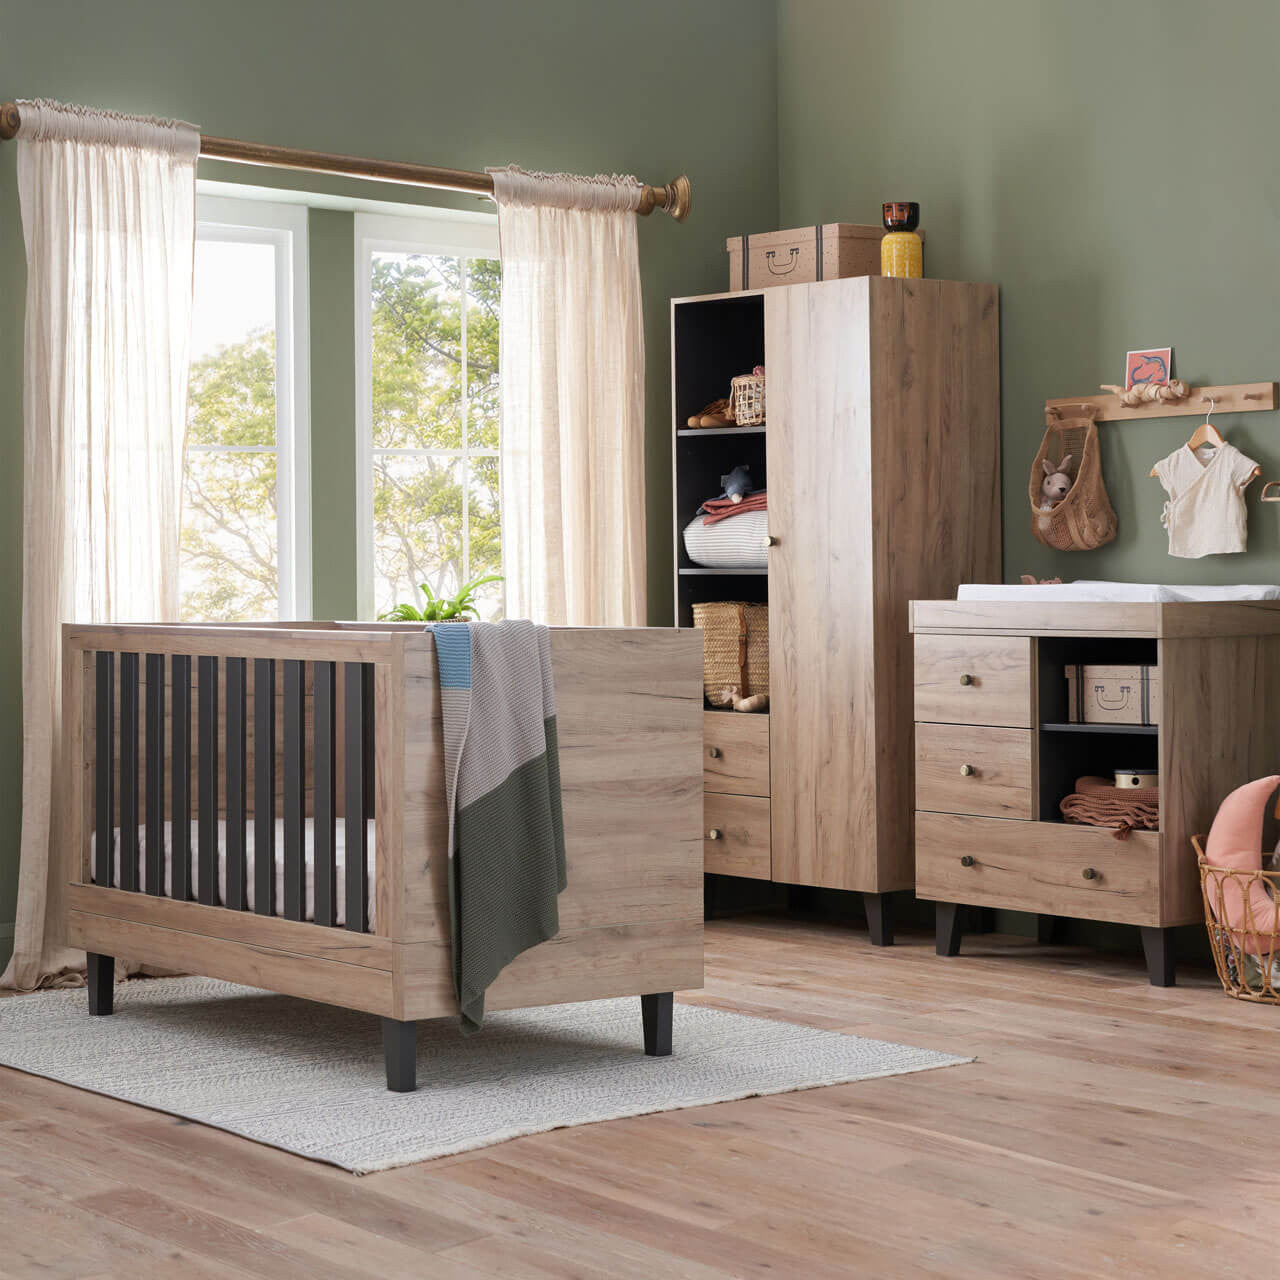 Tutti Bambini Como 3 Piece Room Set - Distressed Oak / Slate Grey -  | For Your Little One